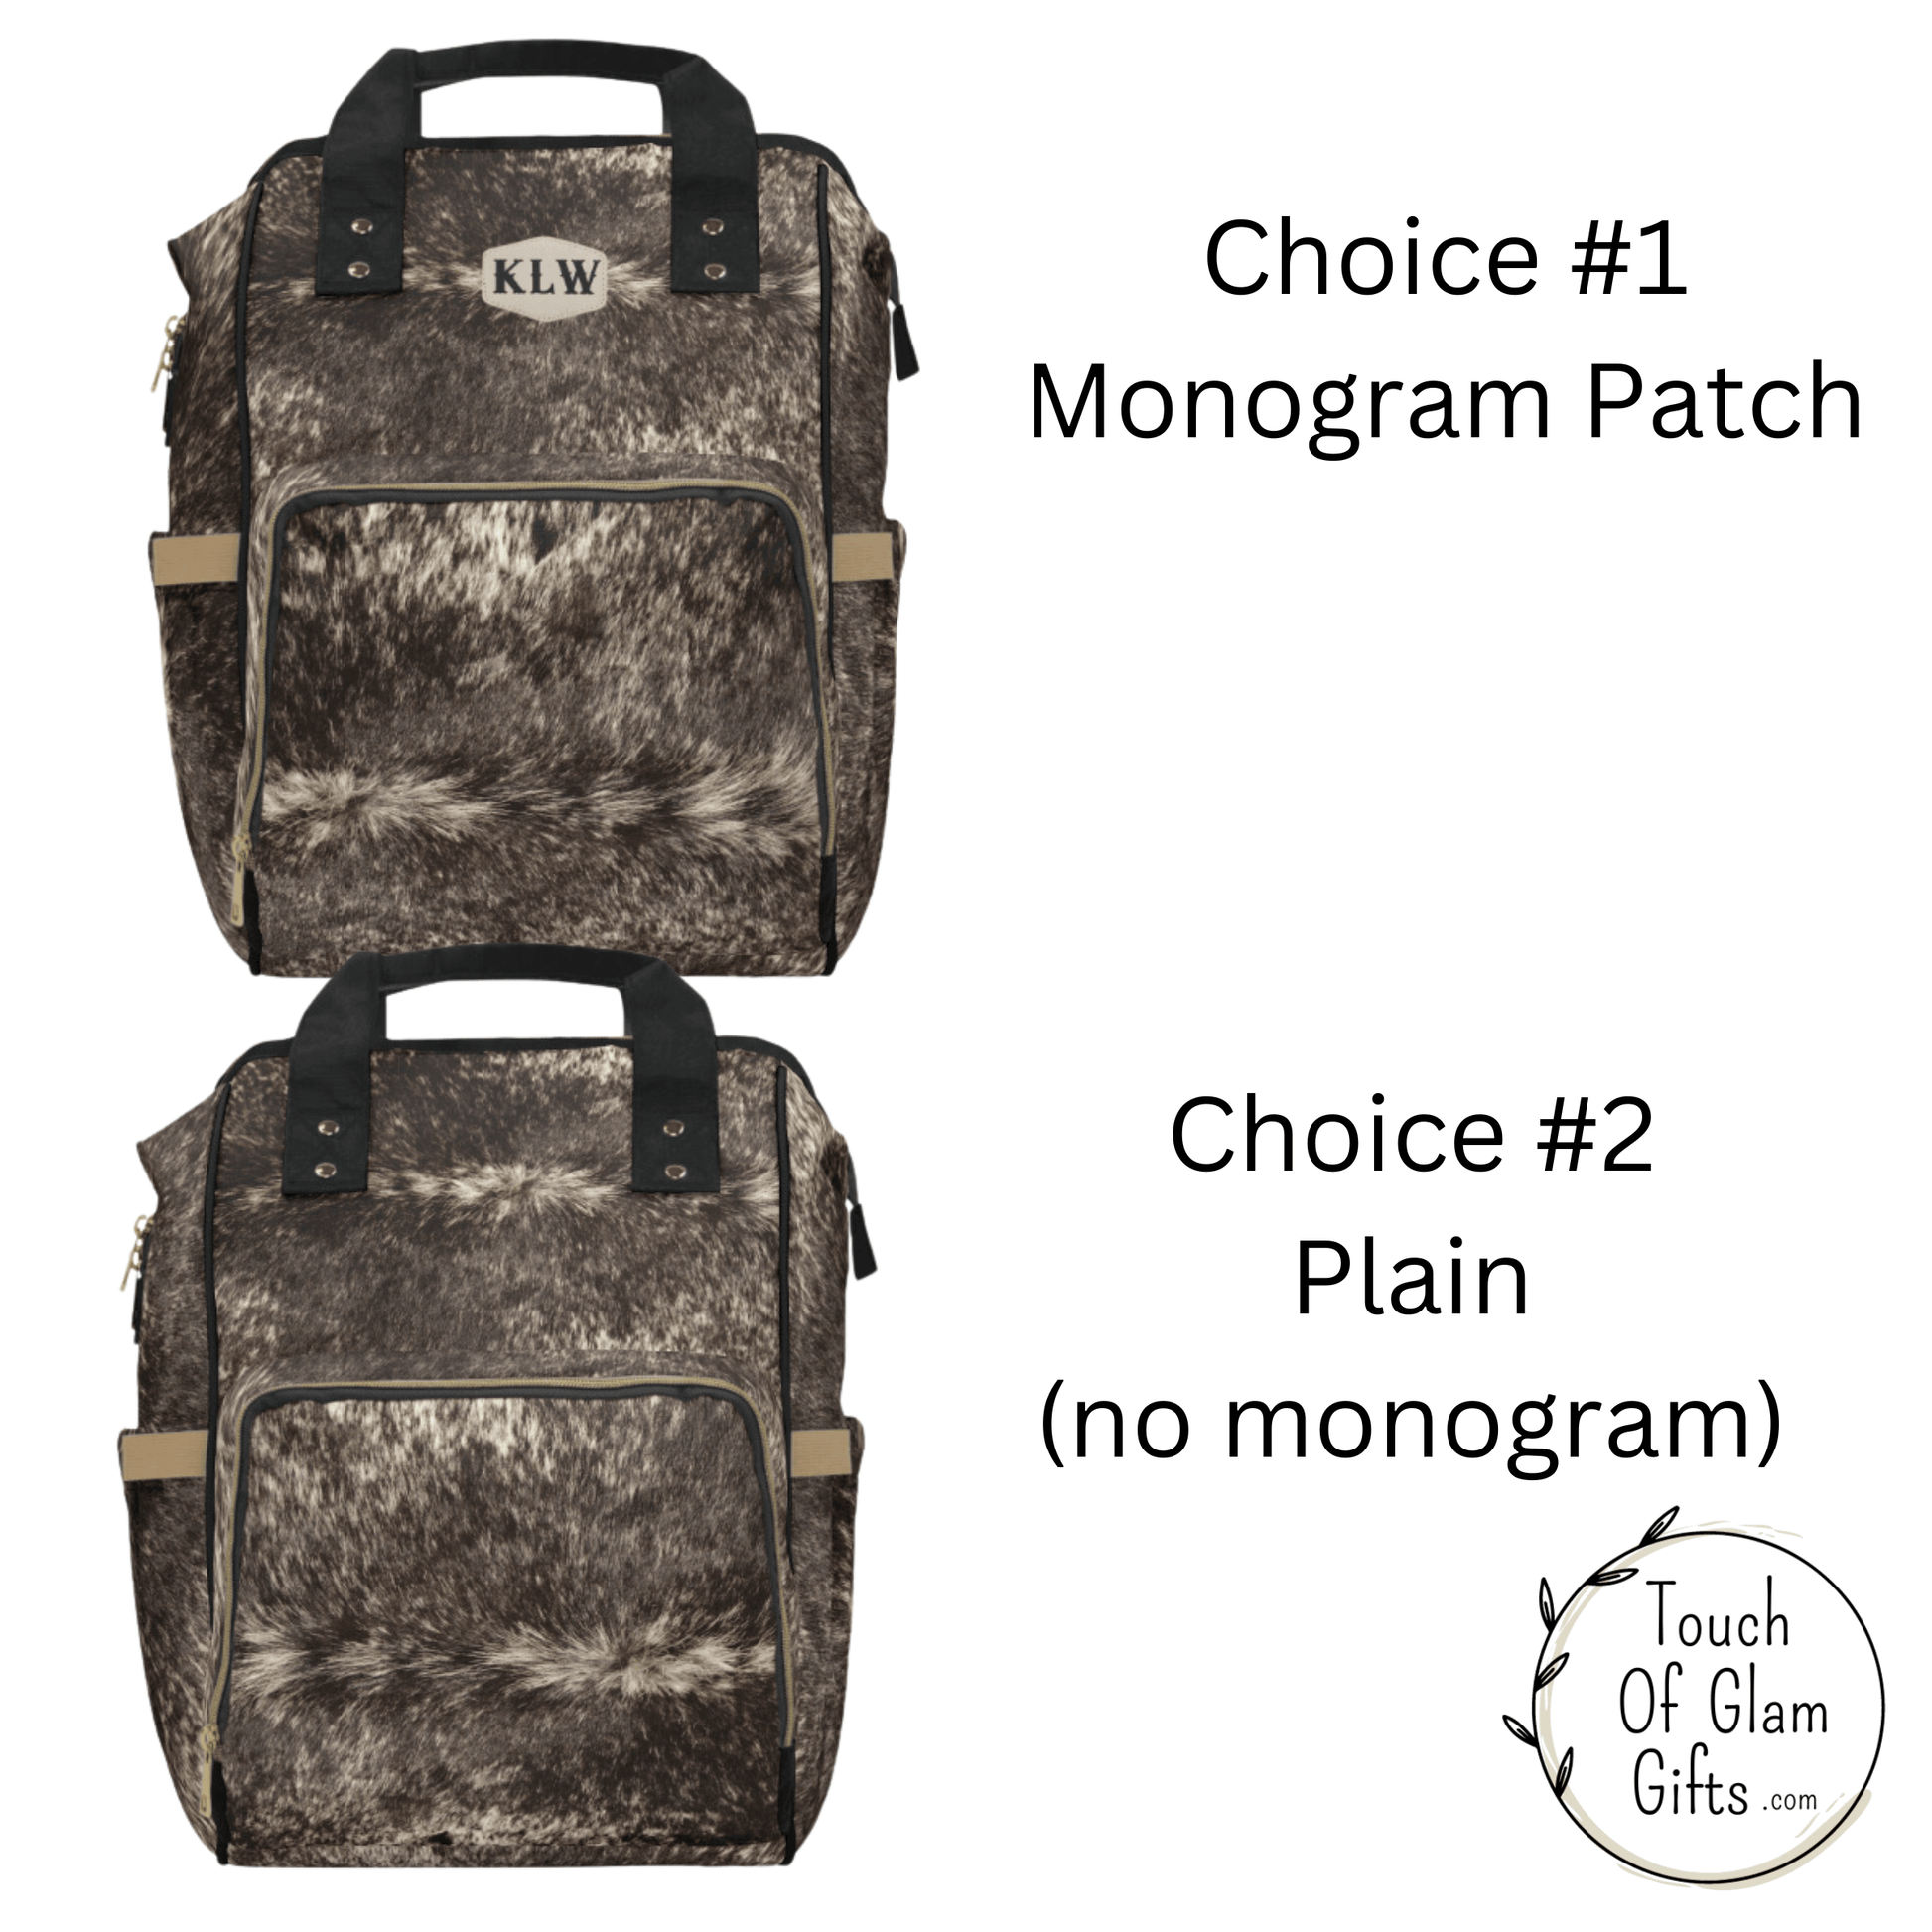 You can monogram your cow print backpack or enjoy it plain.